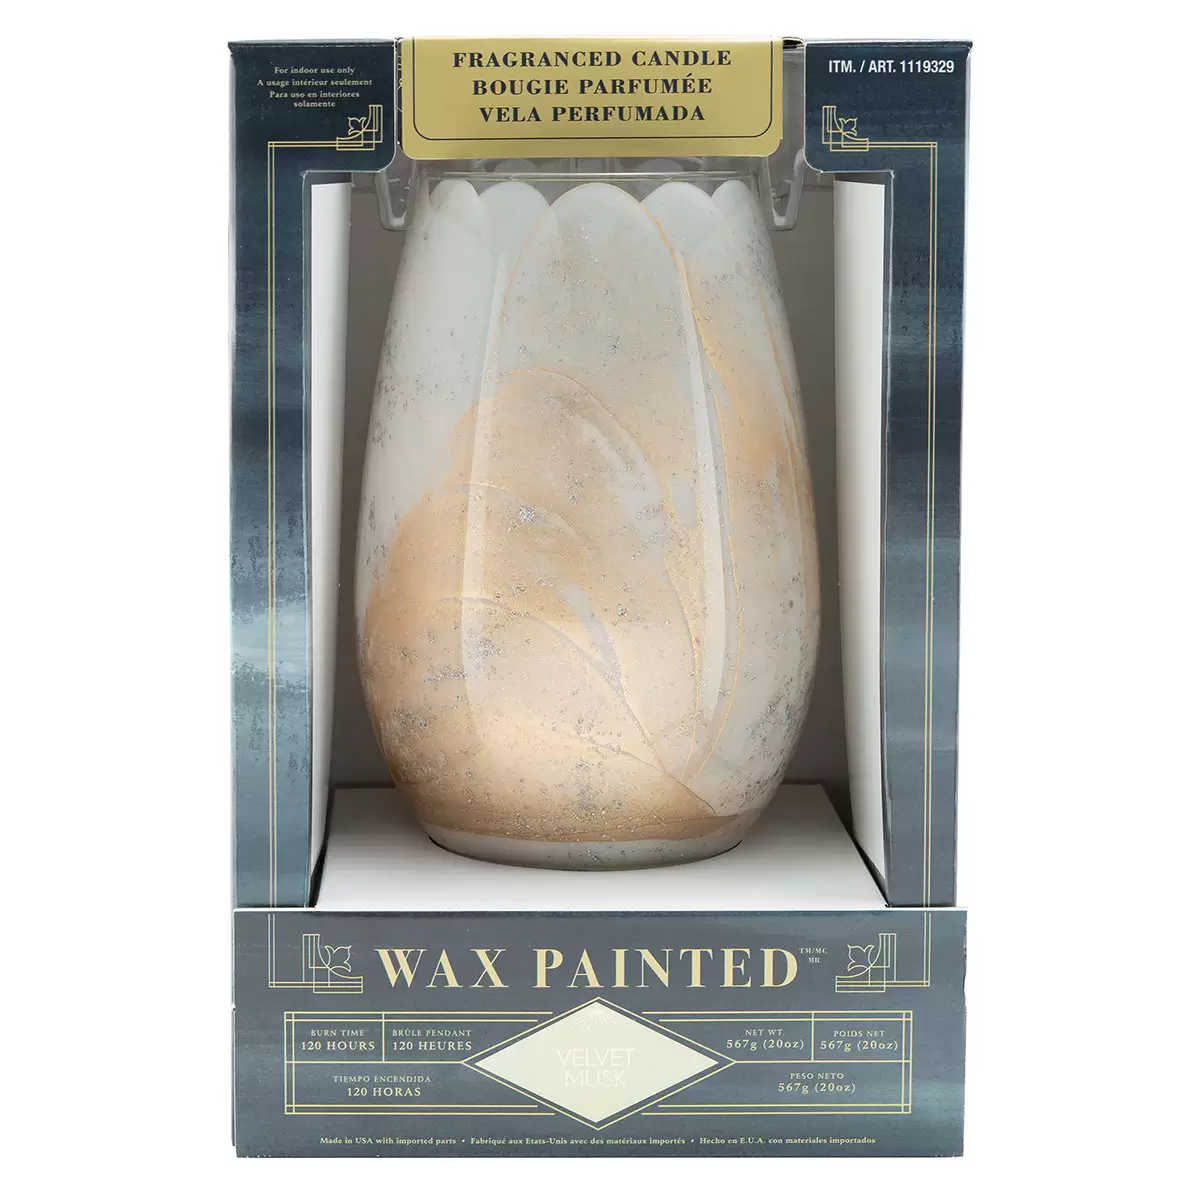 Lifetsyle image of cream candle in packaging side on